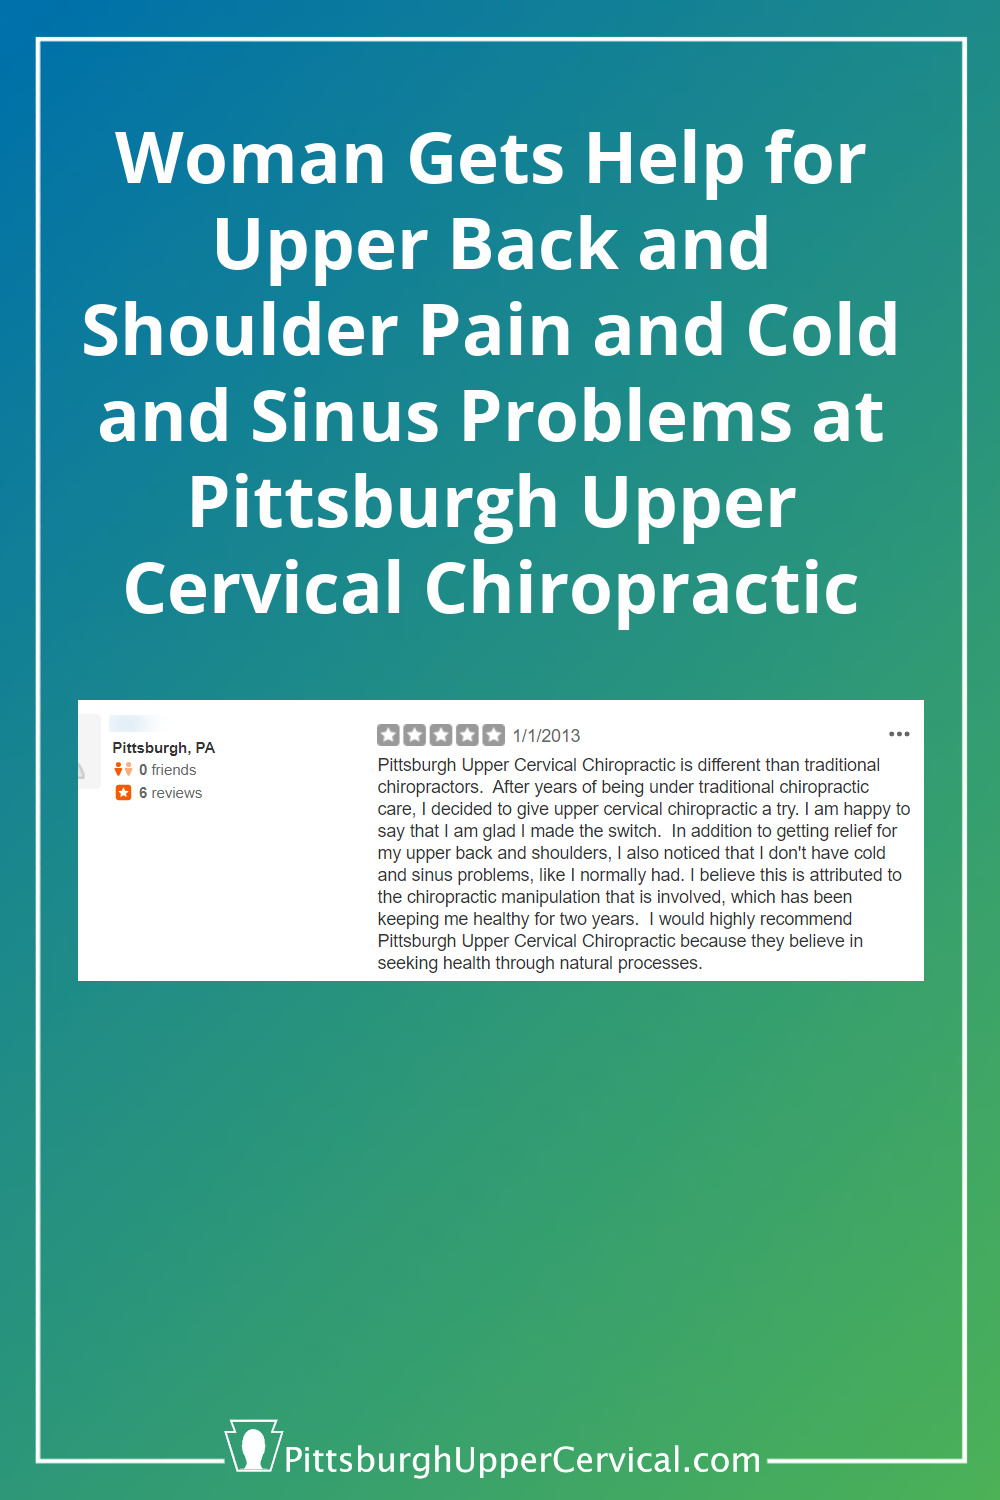 Woman Gets Help for Upper Back and Shoulder Pain and Cold and Sinus Problems at Pittsburgh Upper Cervical Chiropractic Pinterest Pin